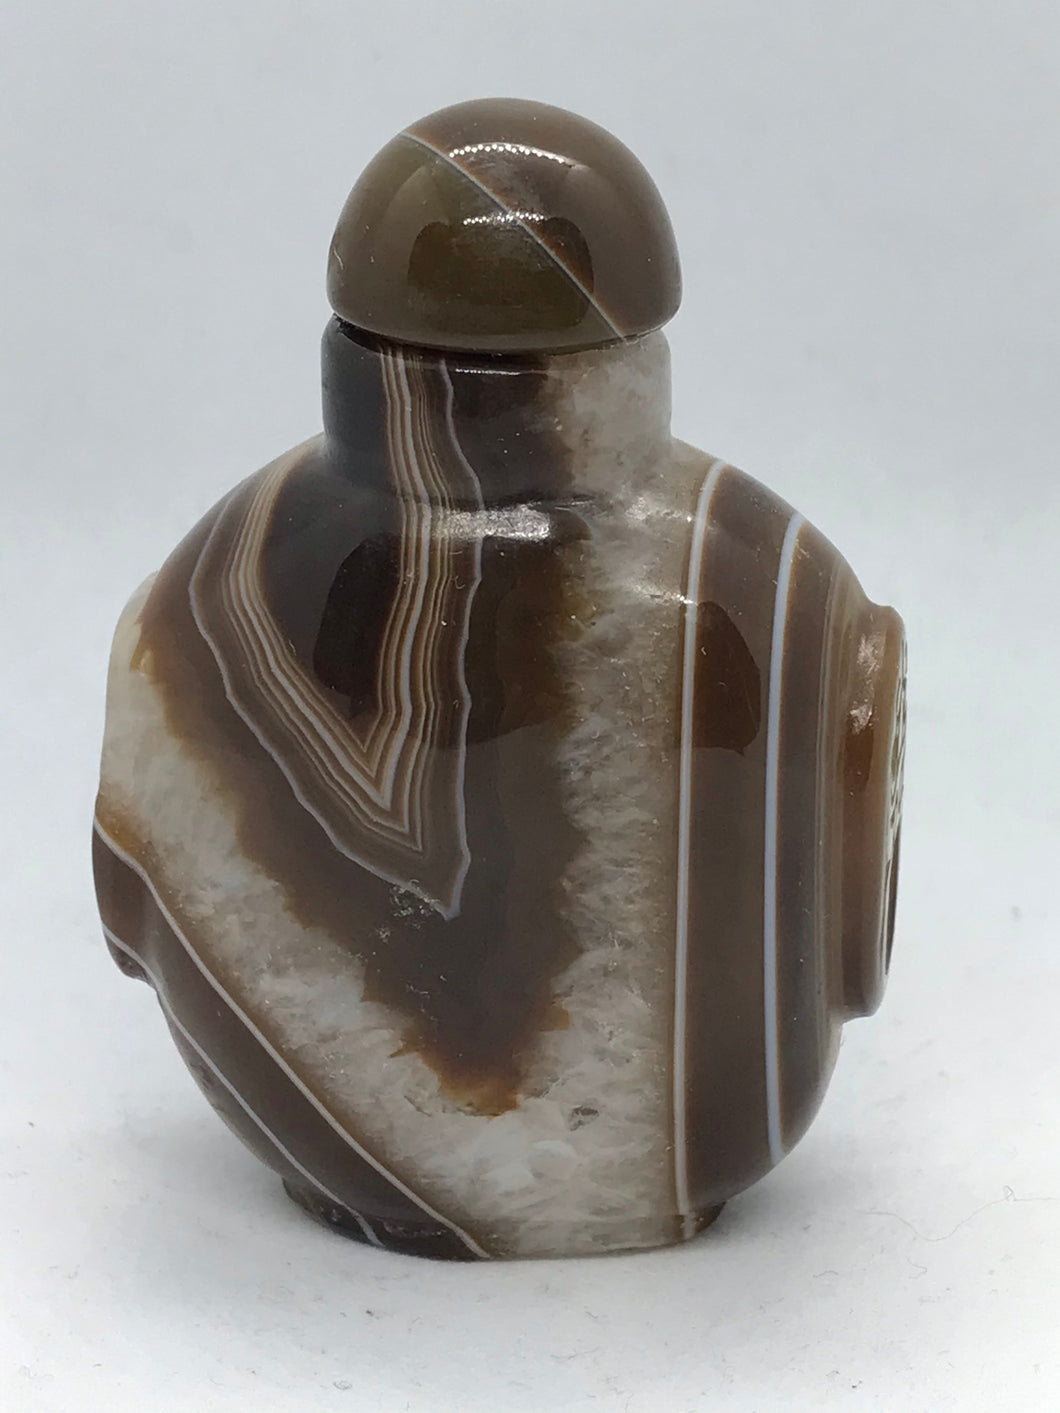 Snuff Bottle: Banded Agate Snuff Bottle from Boswana